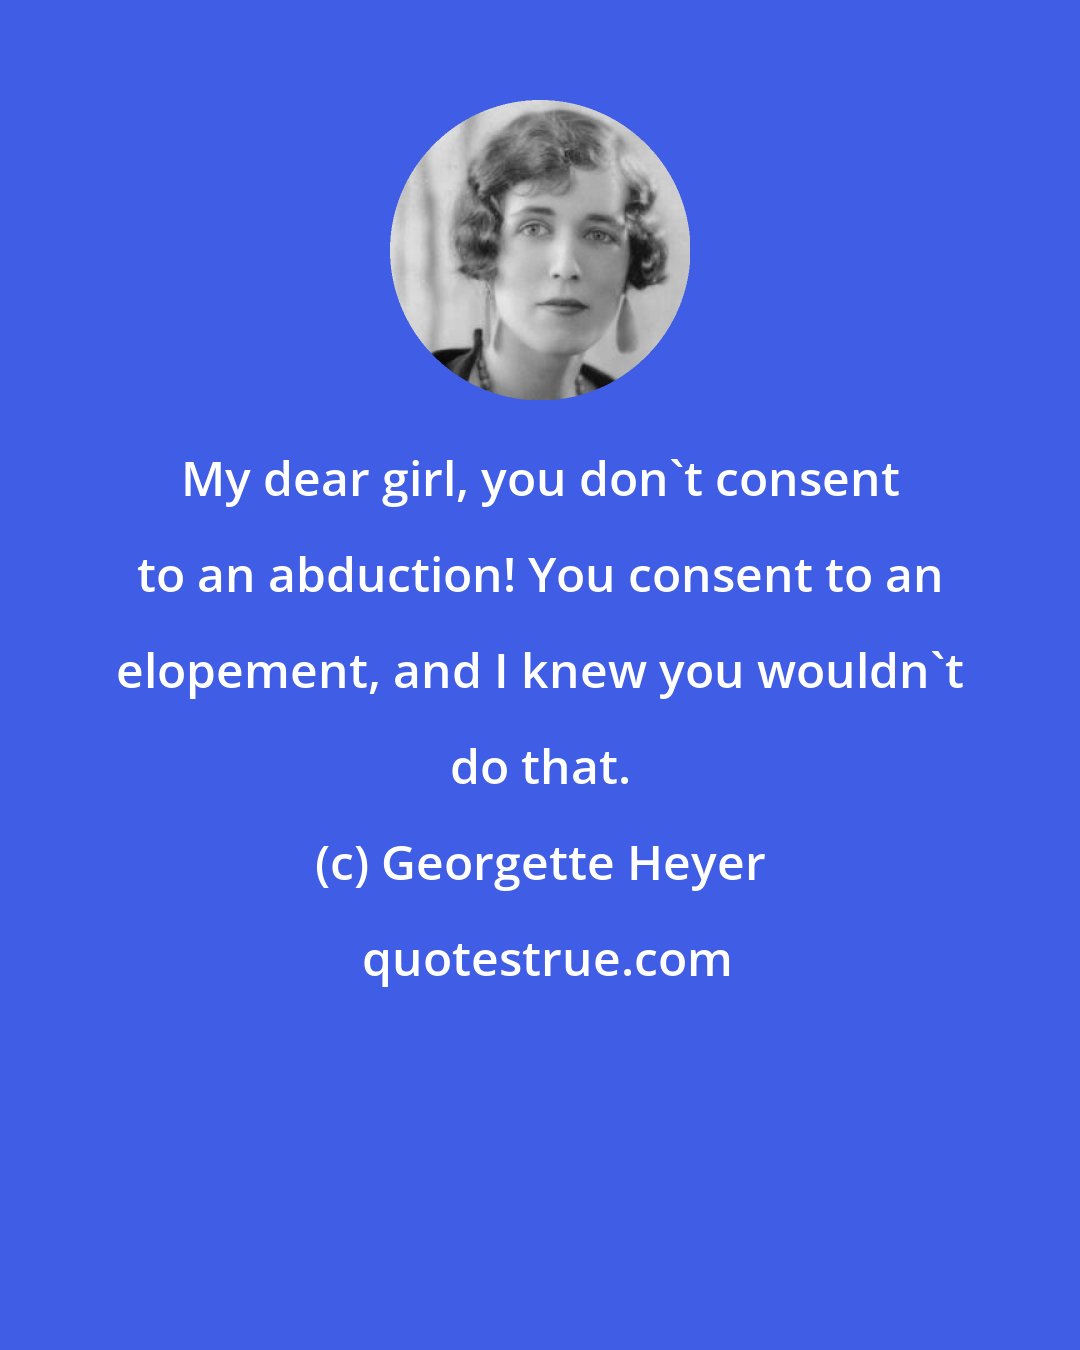 Georgette Heyer: My dear girl, you don't consent to an abduction! You consent to an elopement, and I knew you wouldn't do that.